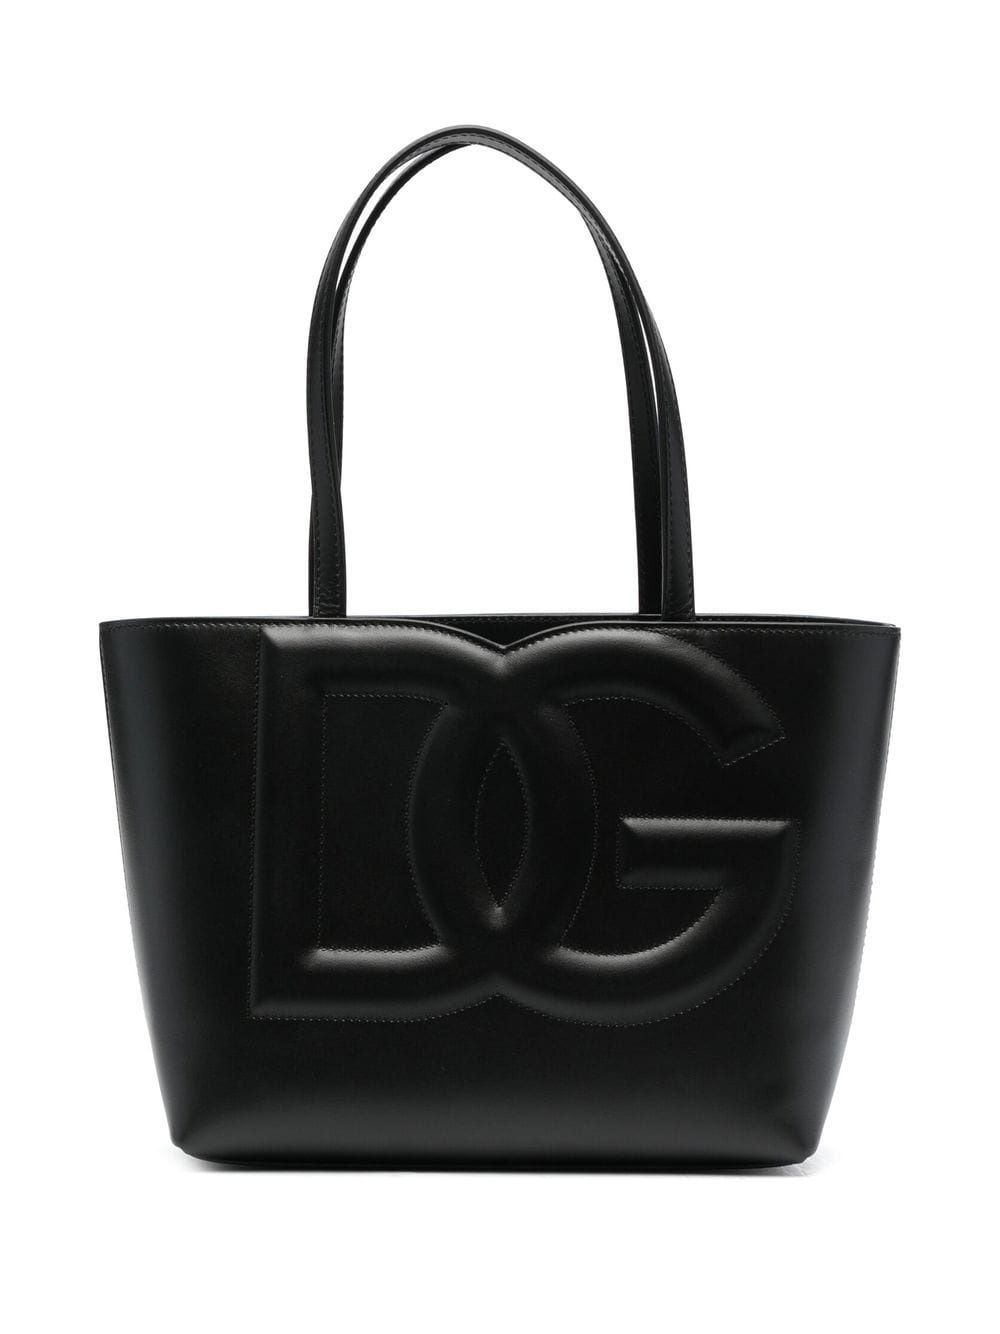 Dg logo small leather tote bag - 1